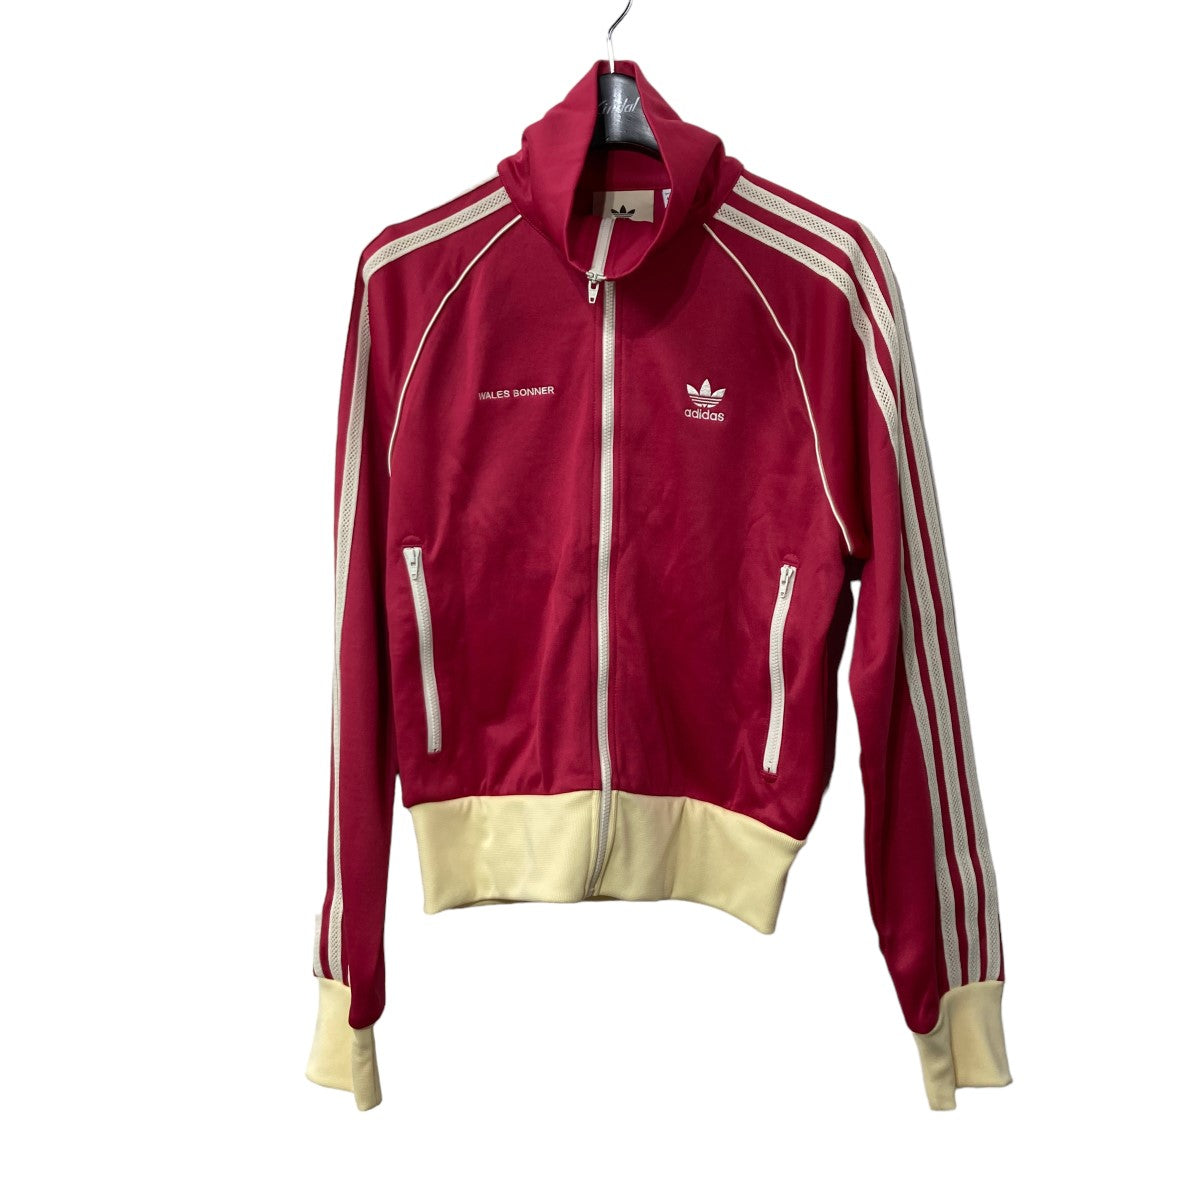 adidas WALES BONNER 70S TRACK TOP H34617 ピンク サイズ ...